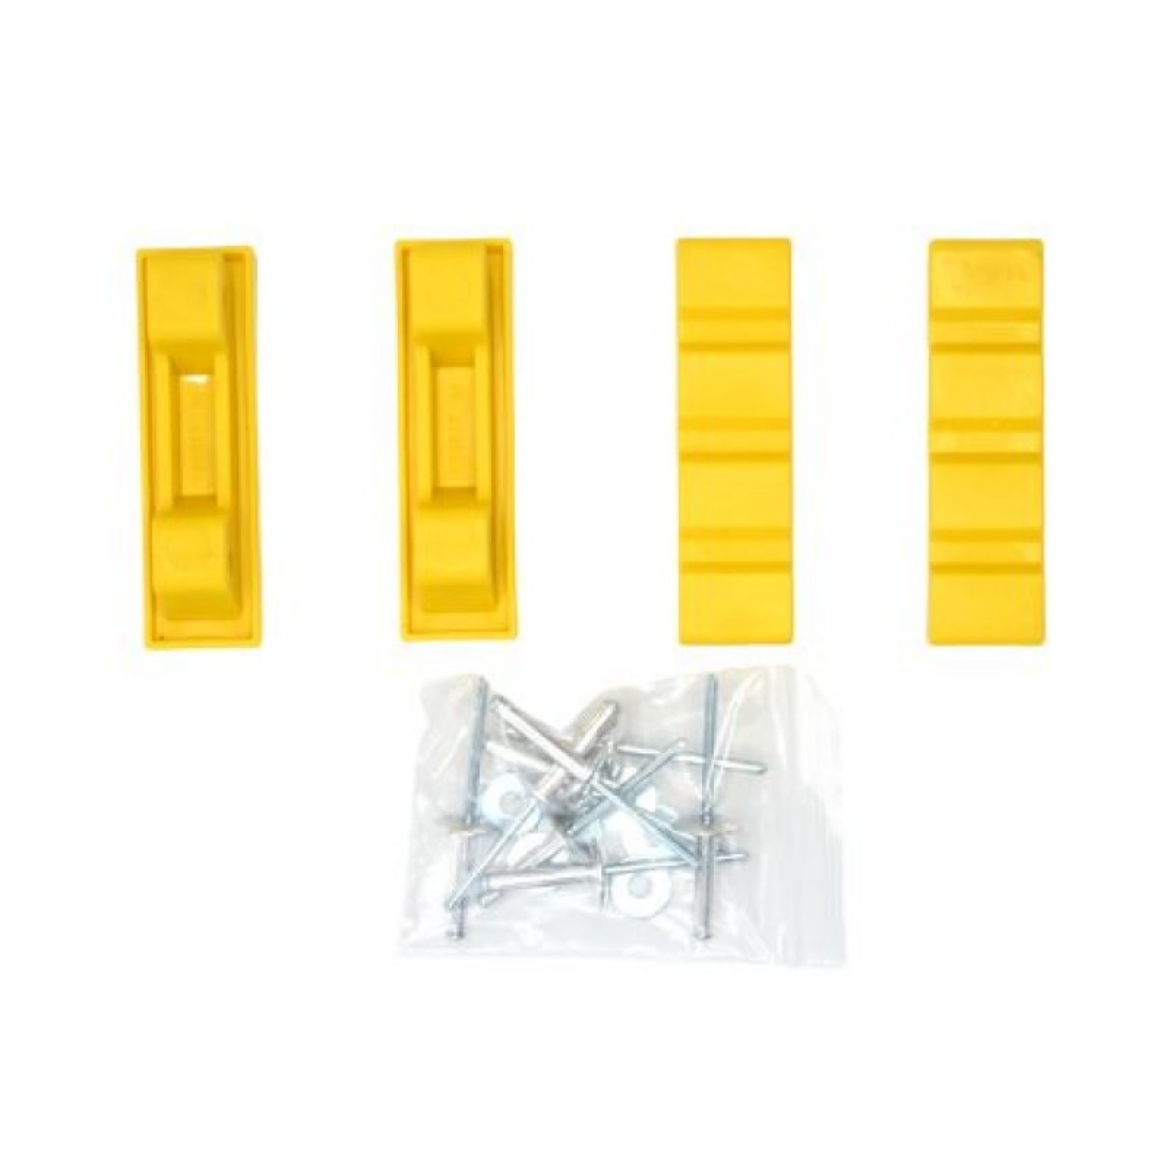 Picture of SPARE PART FOOT KIT AL DS & DP (Legacy products) - Set of 4 Feet